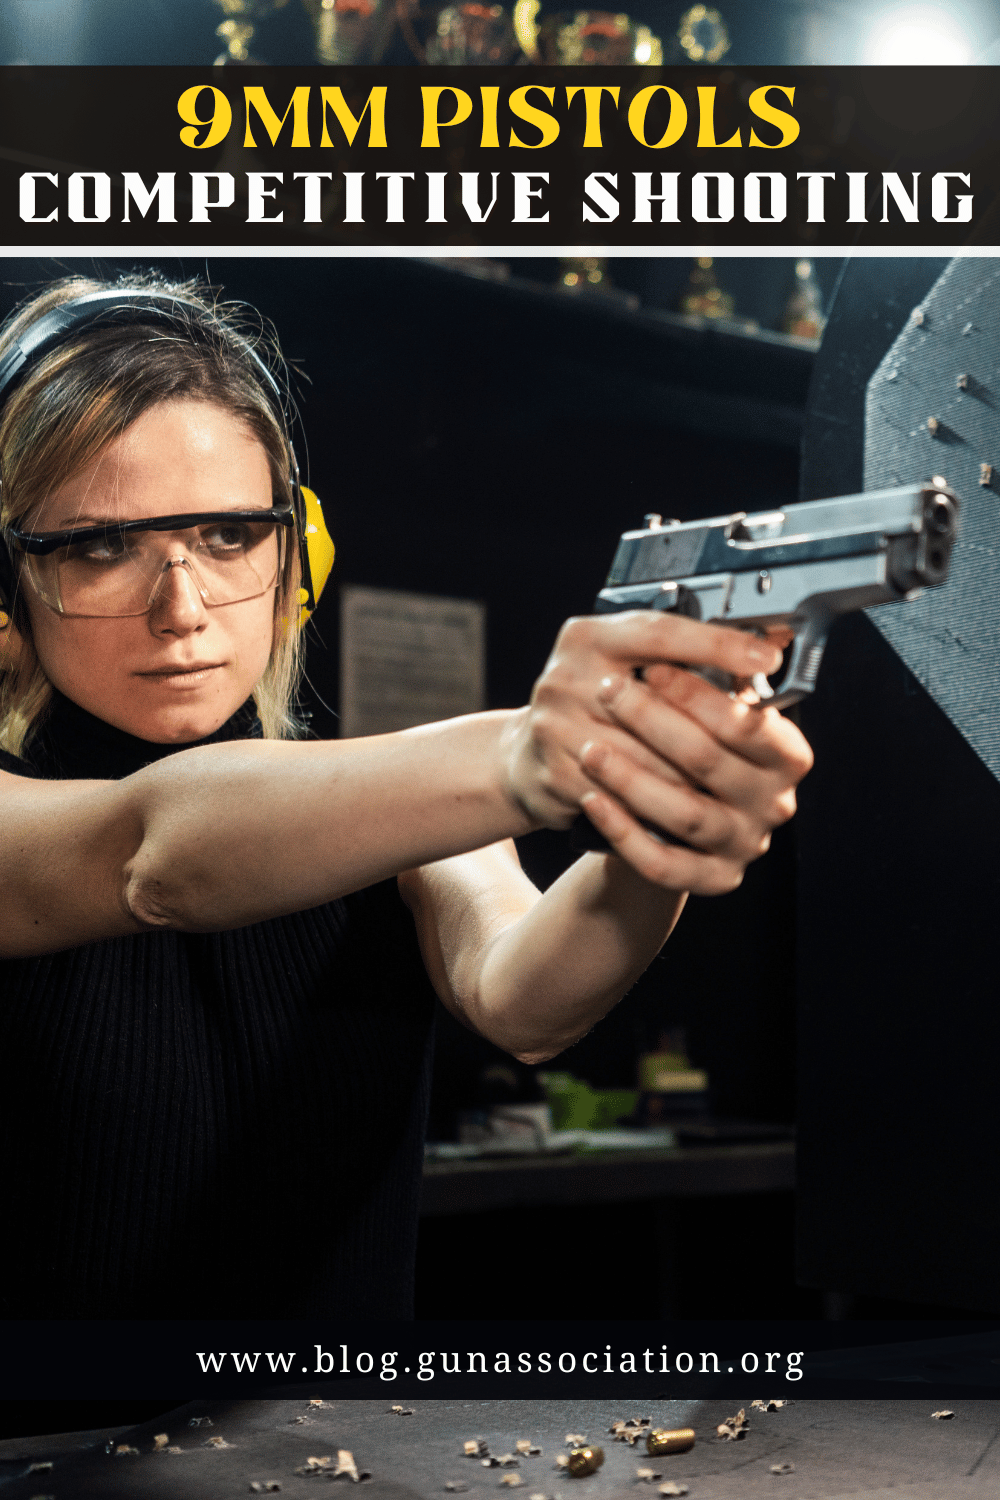 9mm pistols for competitive shooting